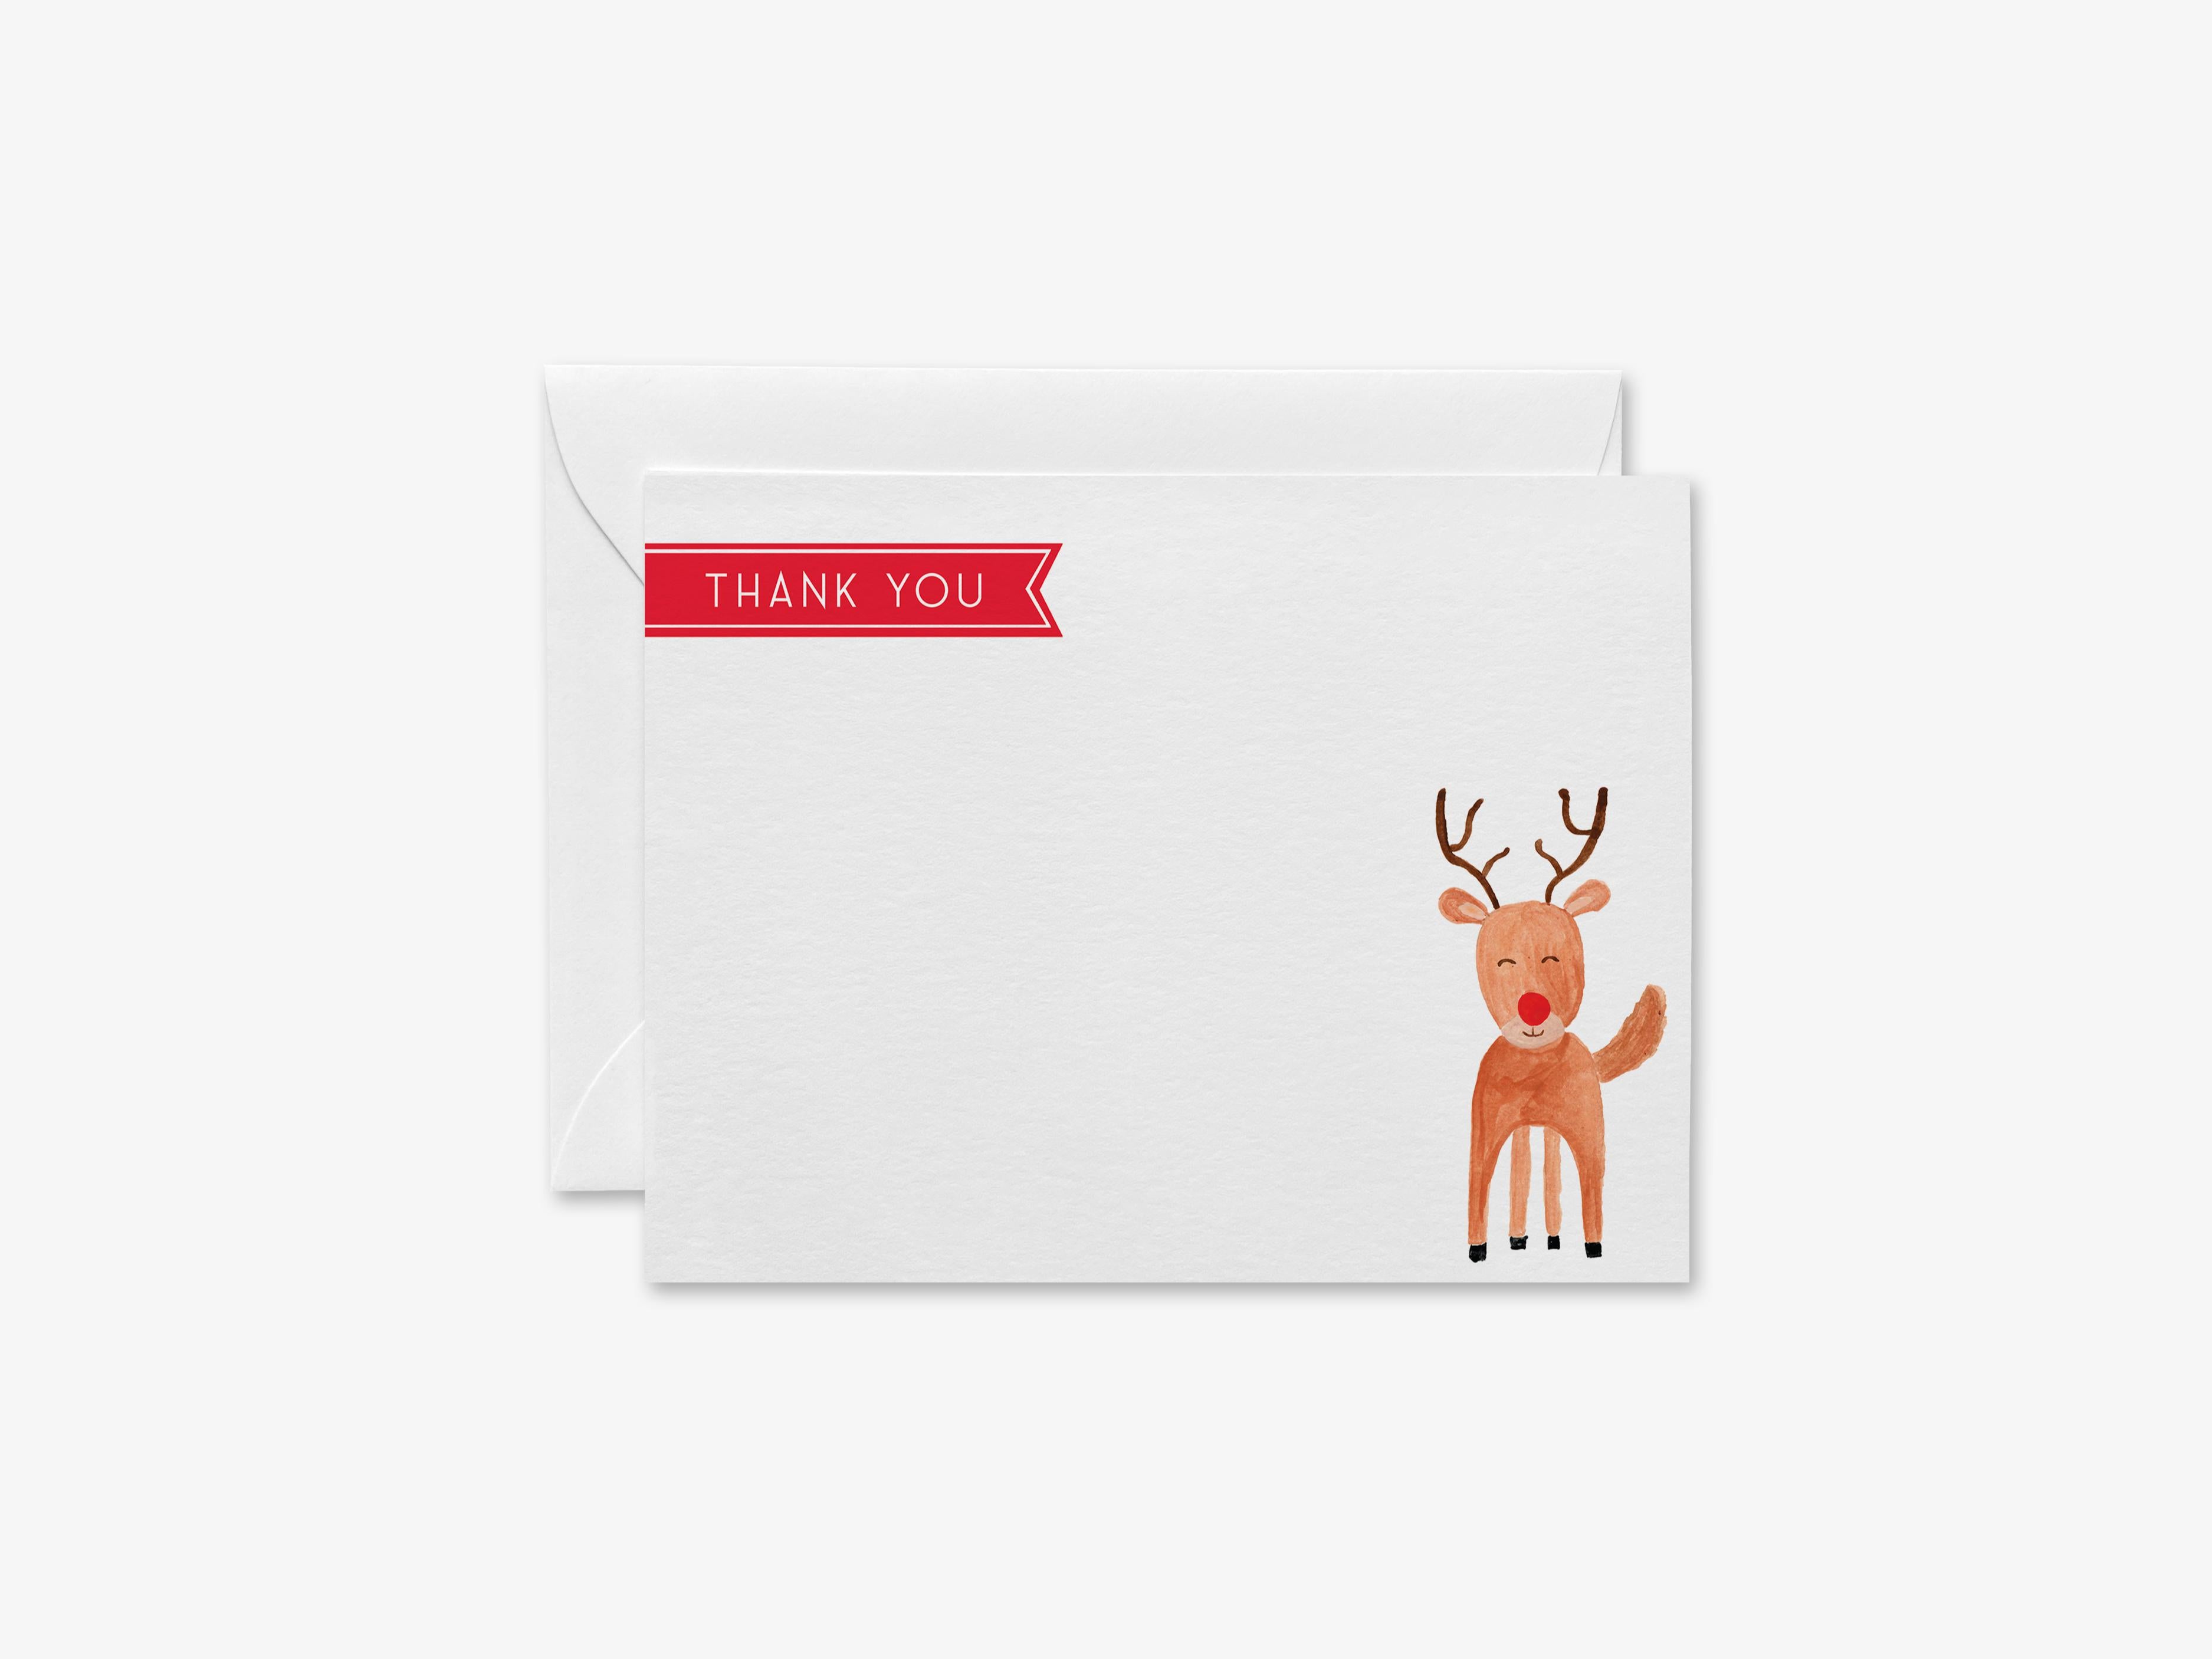 Reindeer Christmas Thank You Notes [Sets of 8]-These flat notecards are 4.25x5.5 and feature our hand-painted watercolor reindeer, printed in the USA on 120lb textured stock. They come with white envelopes and make great thank yous and gifts for the holiday lover in your life.-The Singing Little Bird